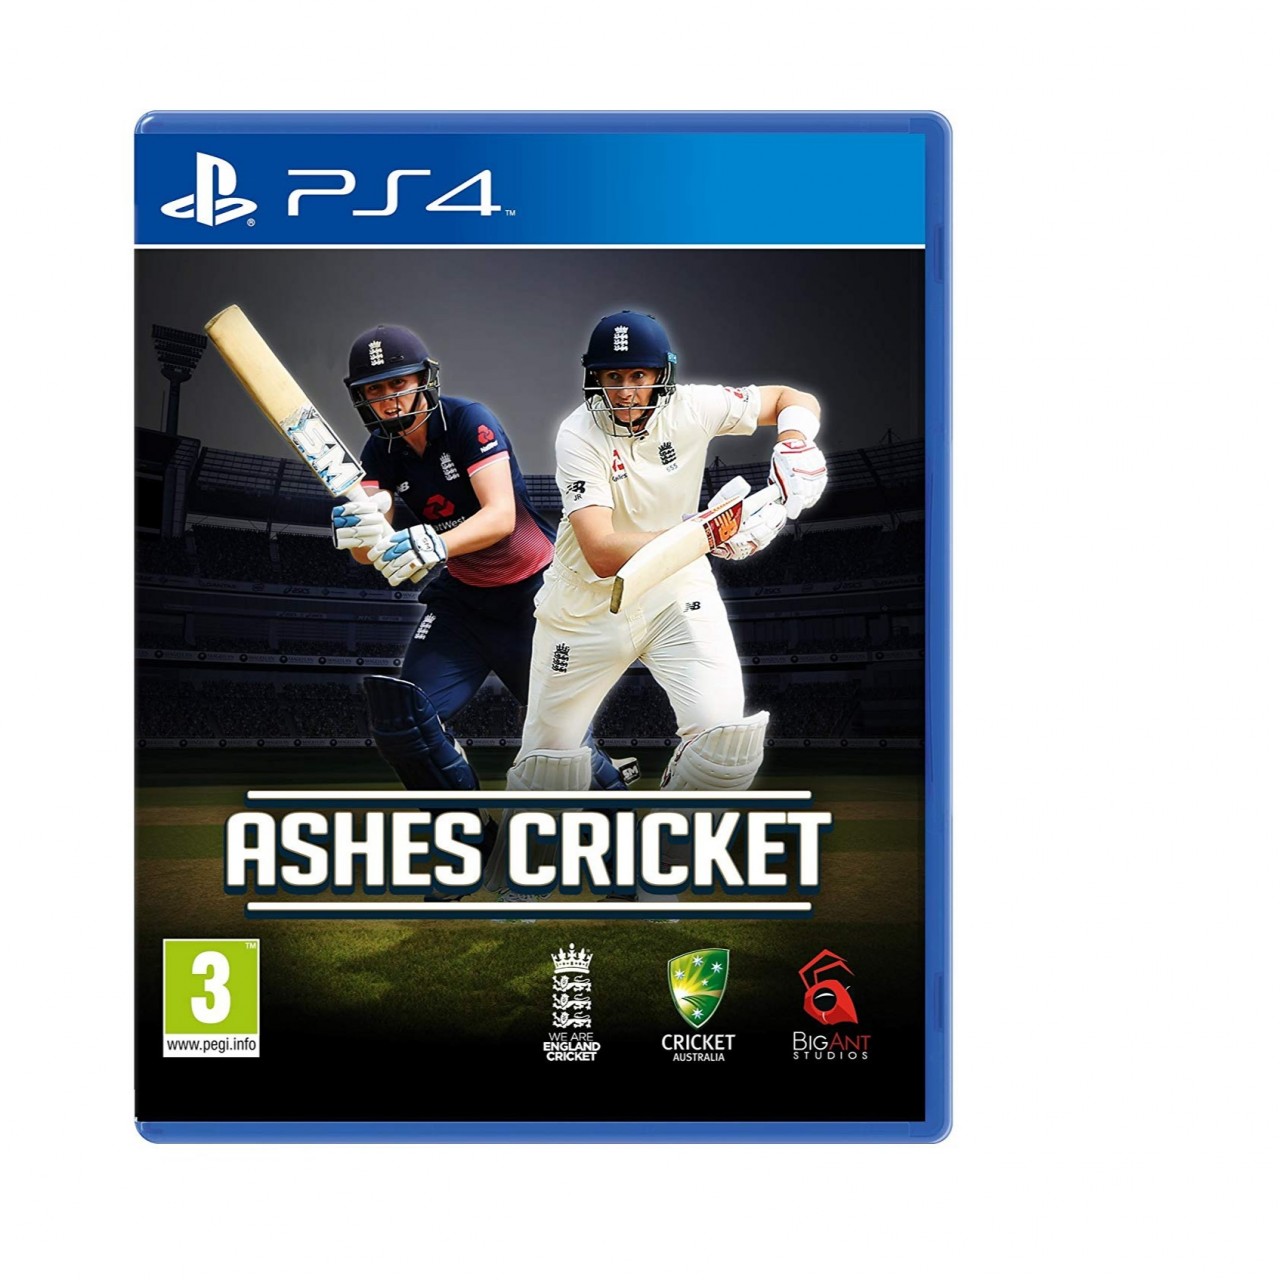 11. PS4 Ashes Cricket Game – Stadiums Featured in Ashes 2017/18 – Features Cricket Academy